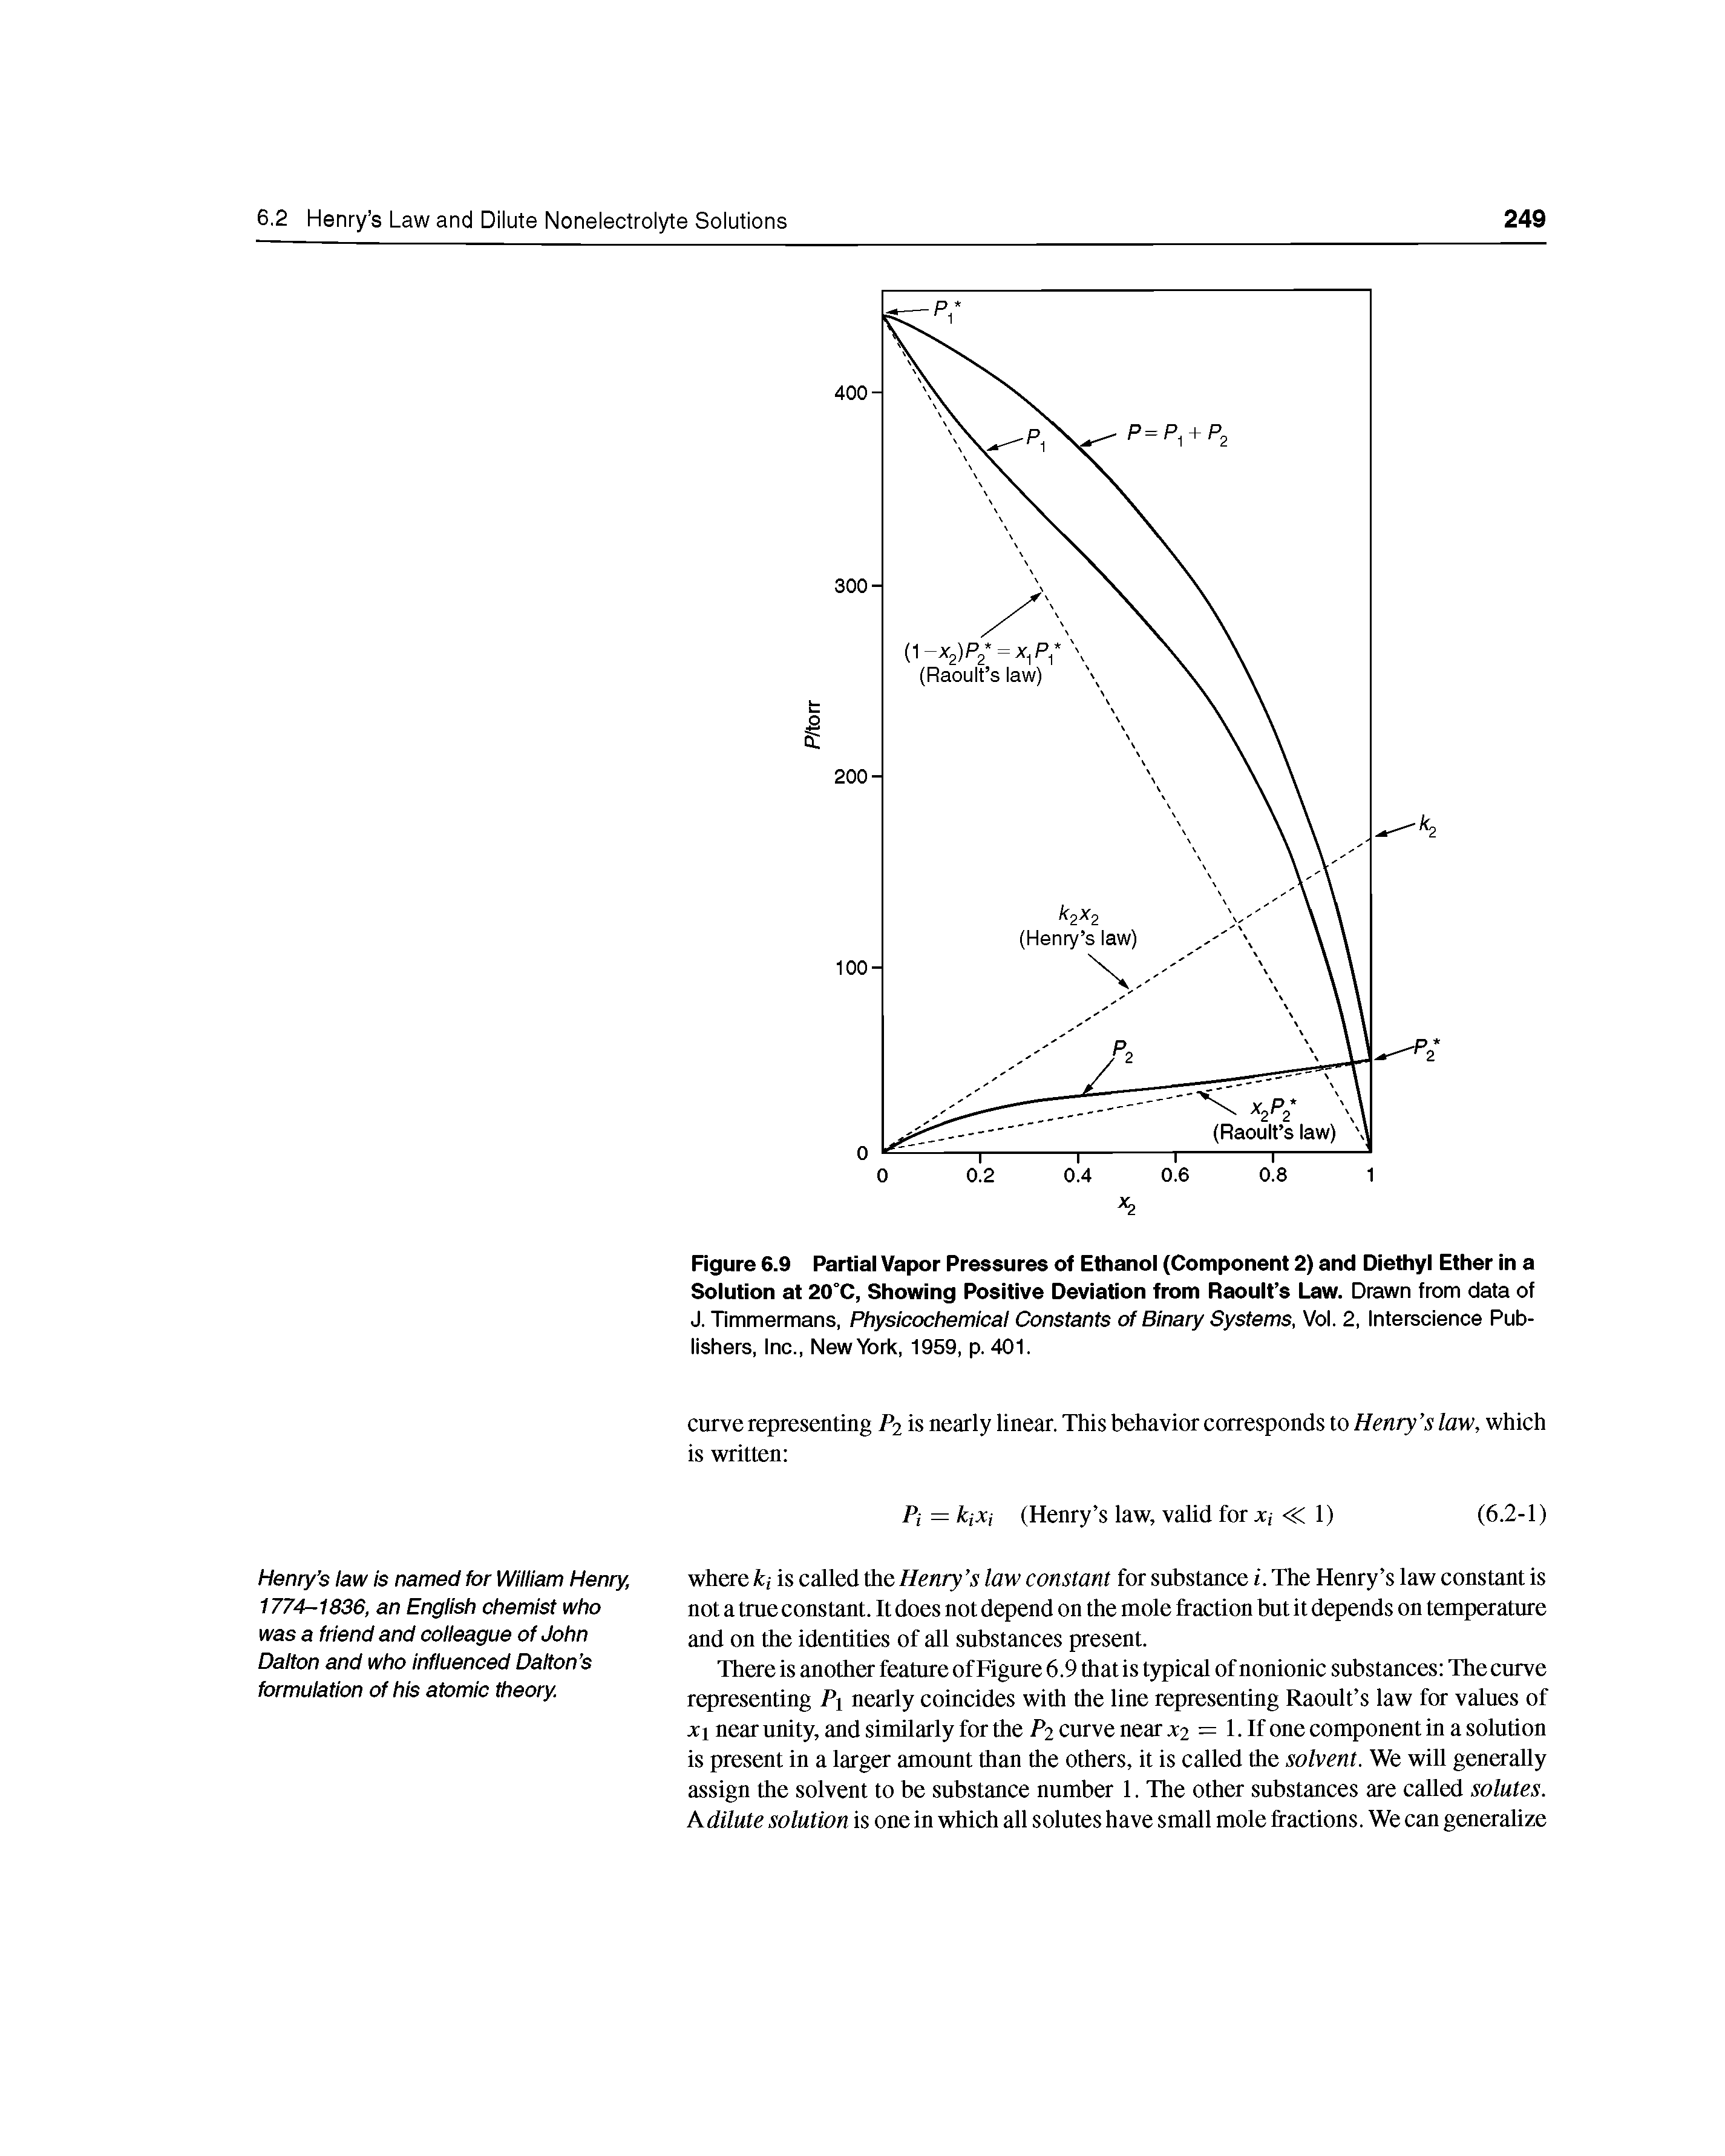 Figure 6.9 Partial Vapor Pressures of Ethanol (Component 2) and Diethyl Ether in a Solution at 20°C, Showing Positive Deviation from Raoult s Law. Drawn from data of J. Timmermans, Physicochemical Constants of Binary Systems, Vol. 2, Interscience Publishers, Inc., New York, 1959, p. 401.